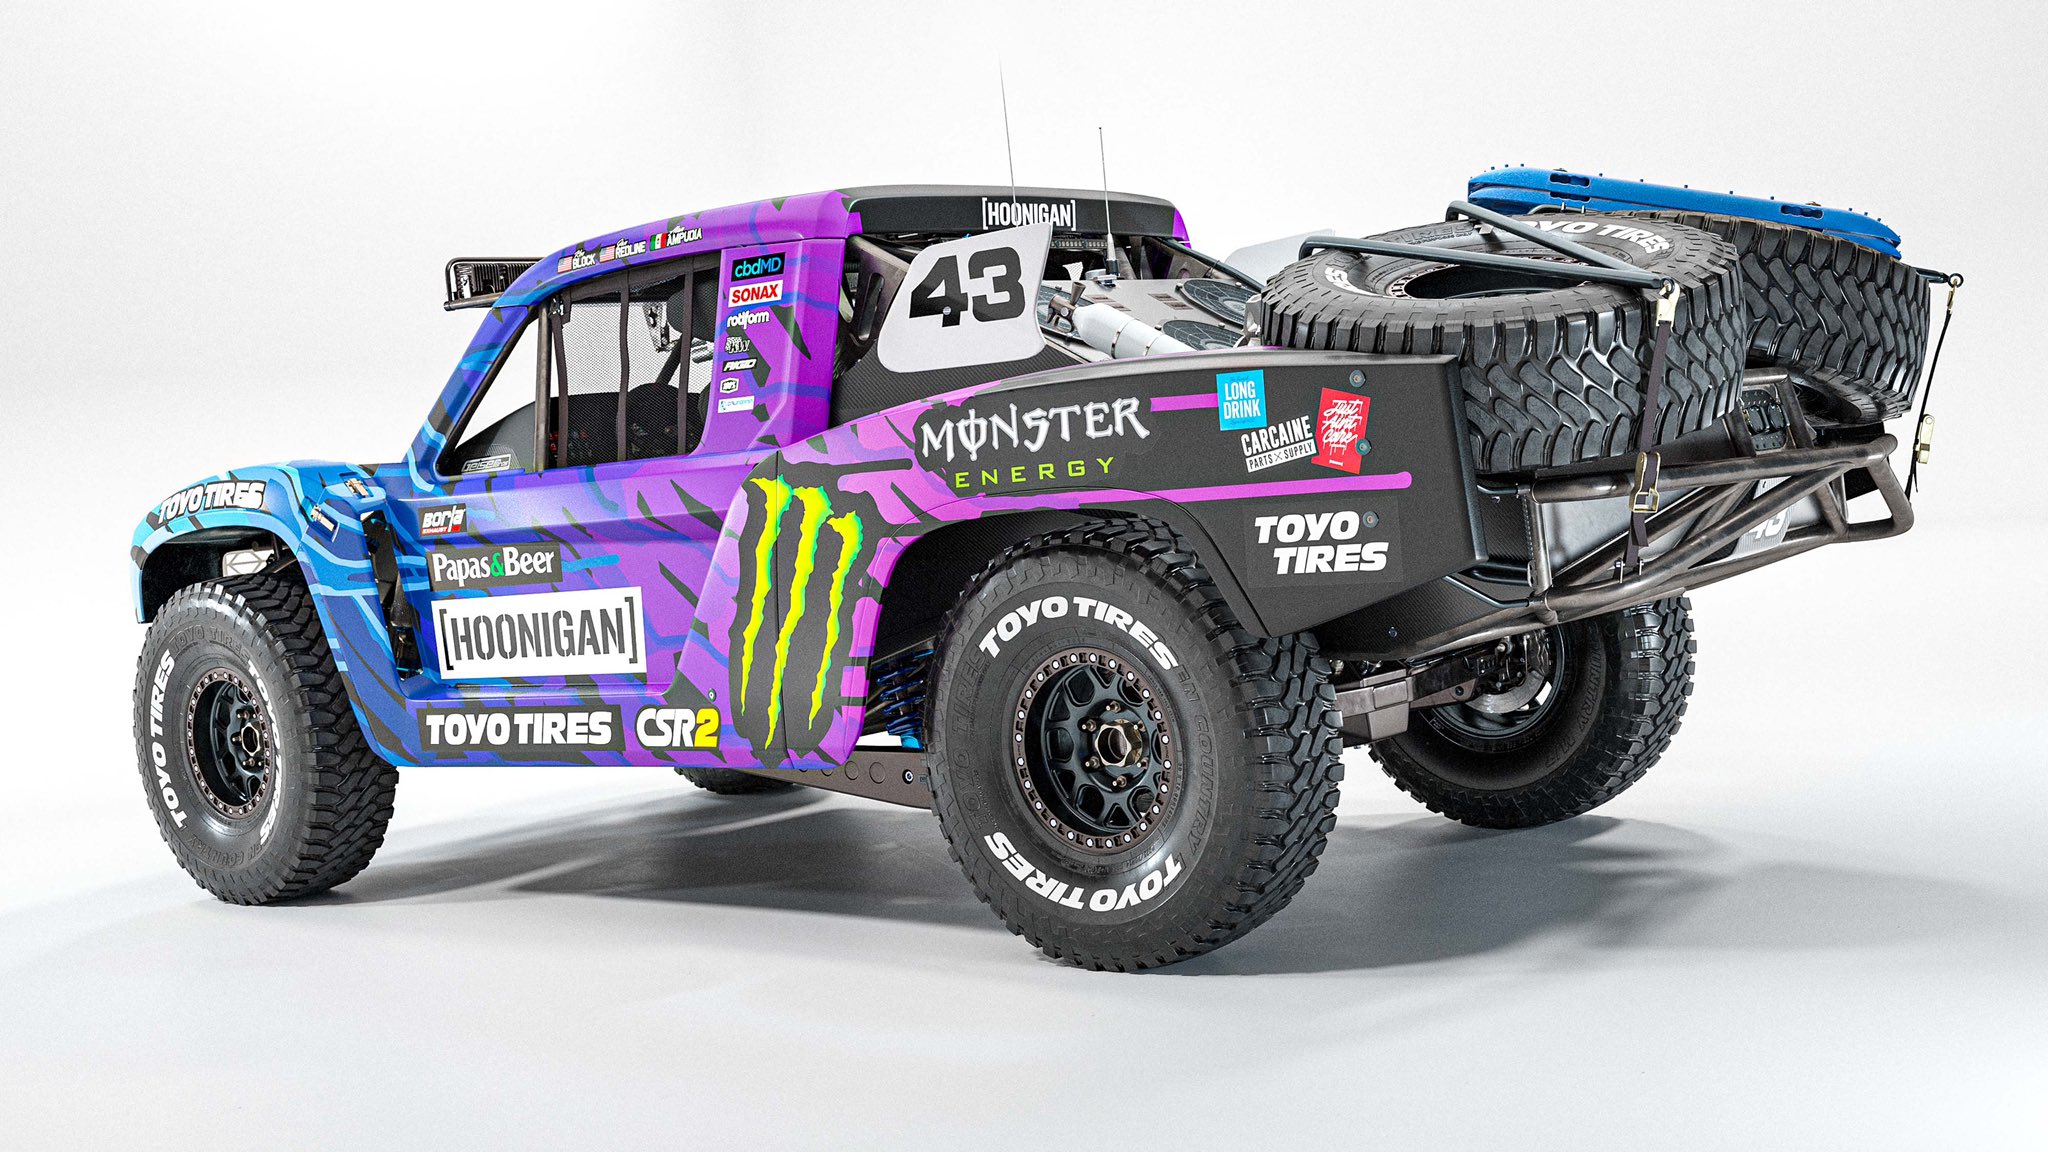 Ken Block в Твиттере: «Here it is: a closer look at the Trophy Truck that Alan Ampudia, Jax Redline and I will be racing in this year's Baja featuring my 2021